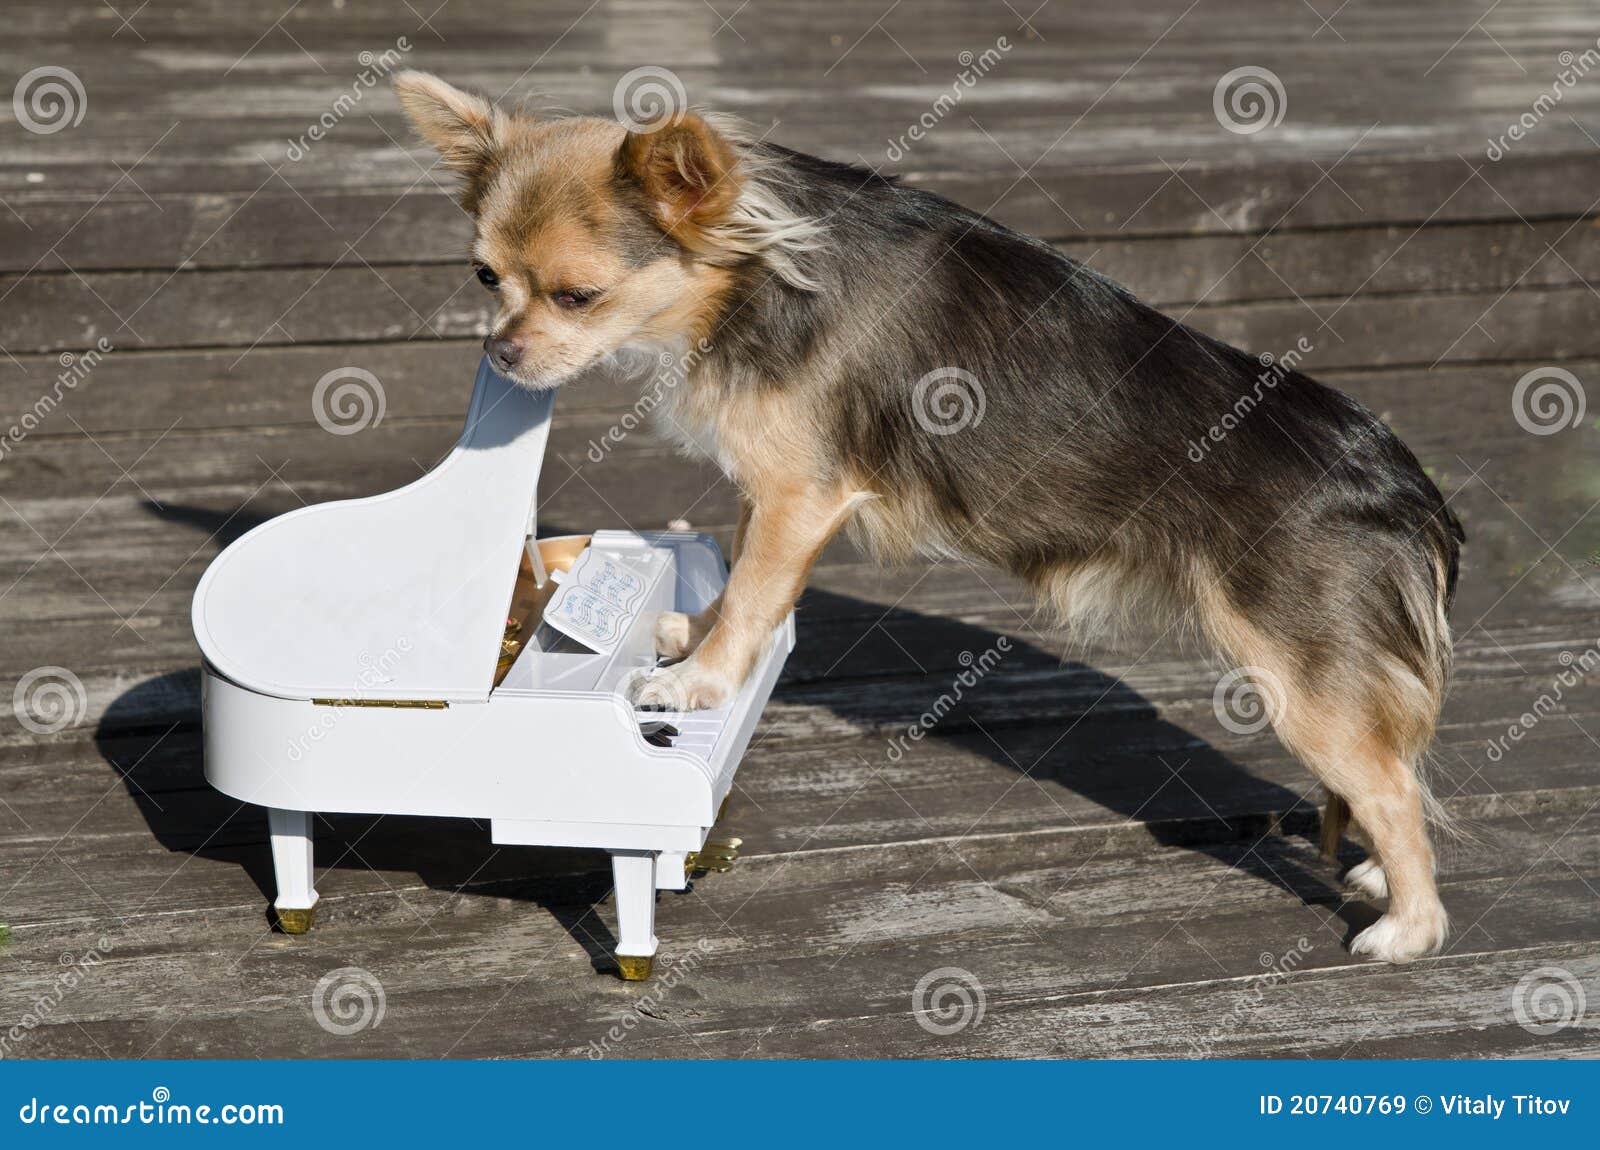 maestro chihuahua dog is playing on piano